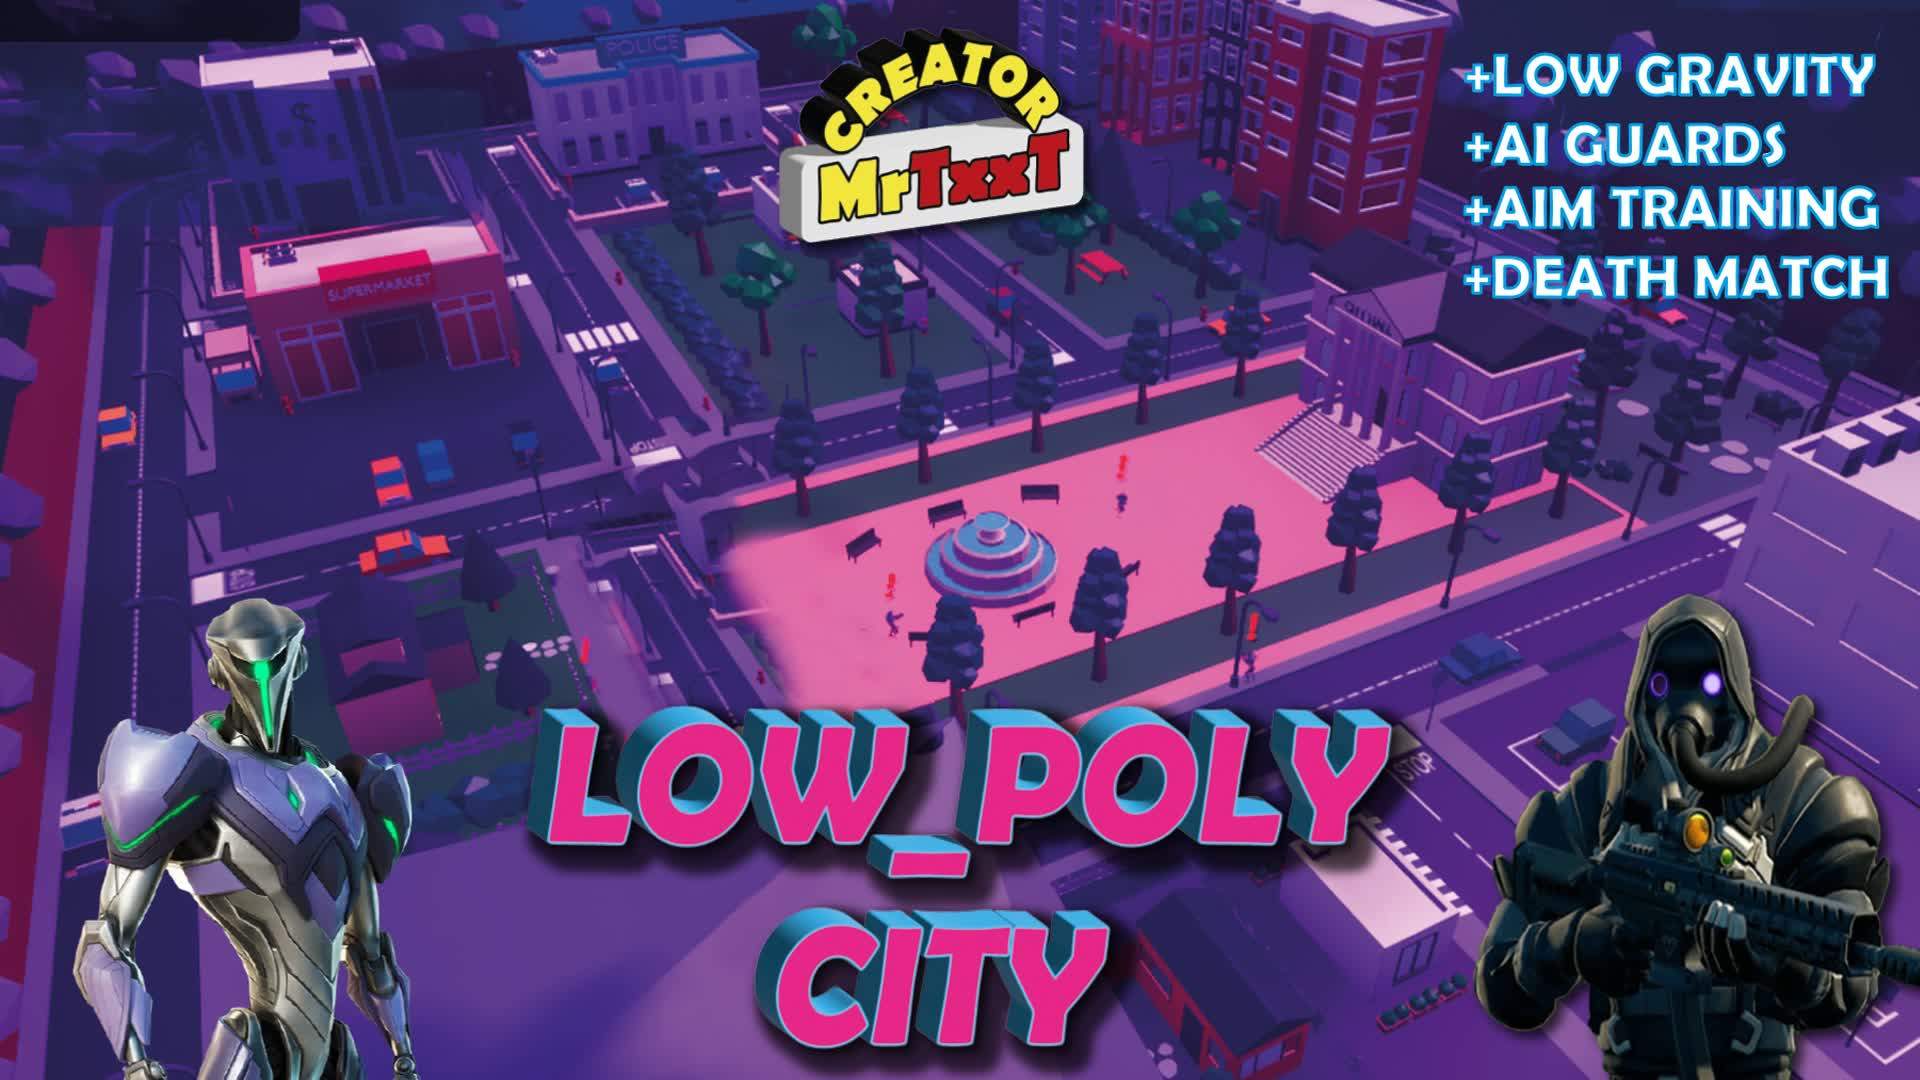 Low Poly City - Fast Paced, Fun Map!